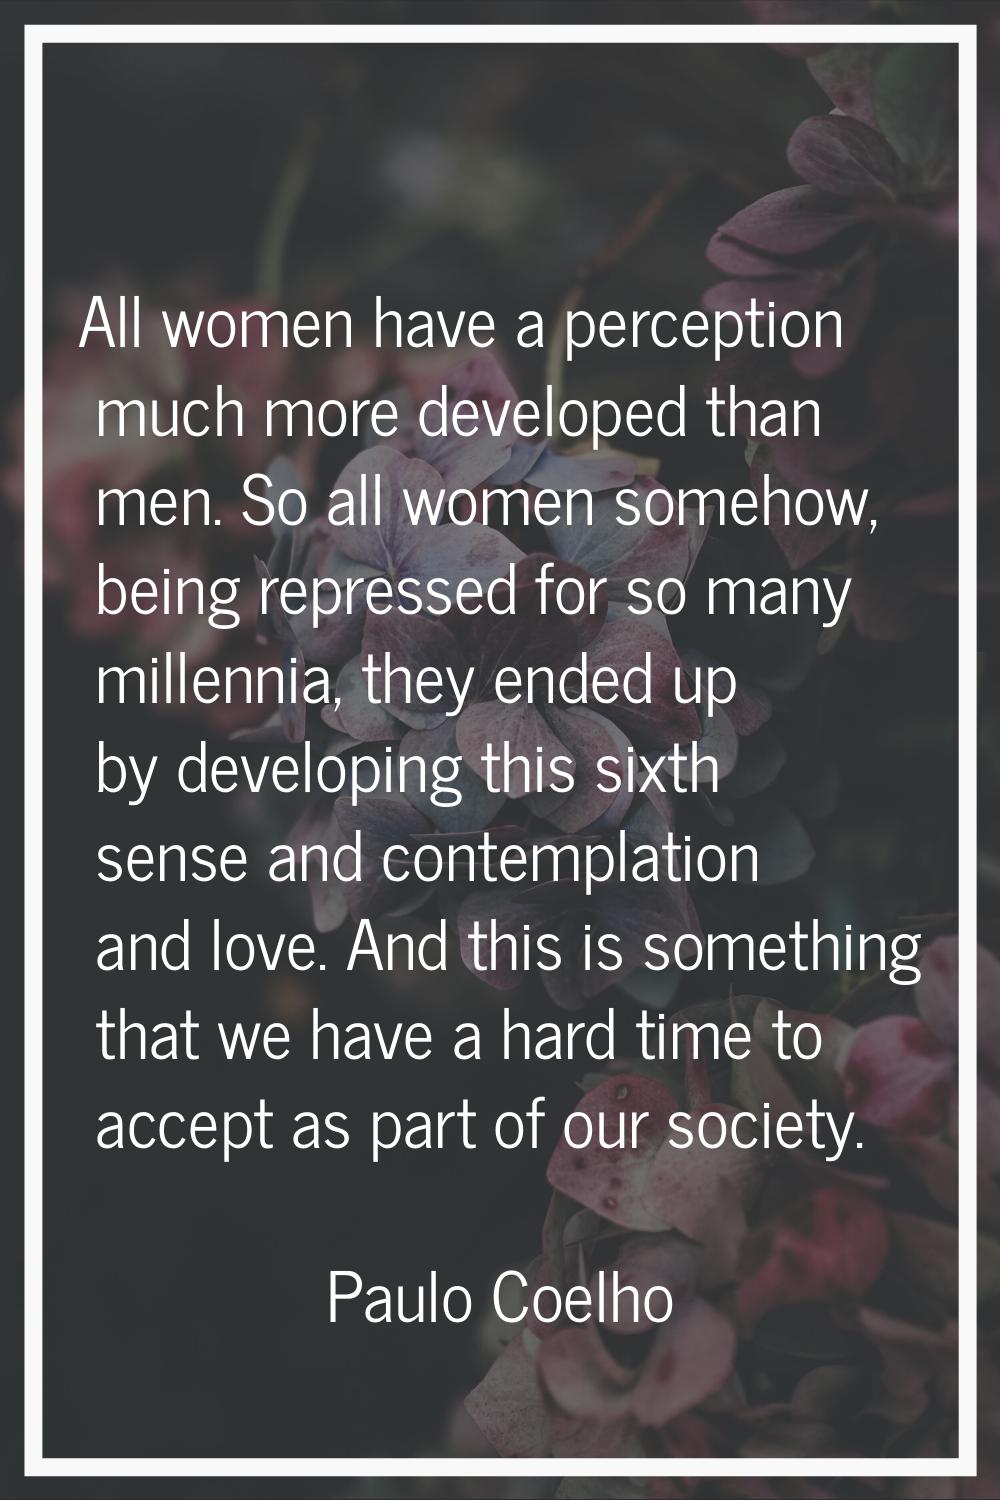 All women have a perception much more developed than men. So all women somehow, being repressed for